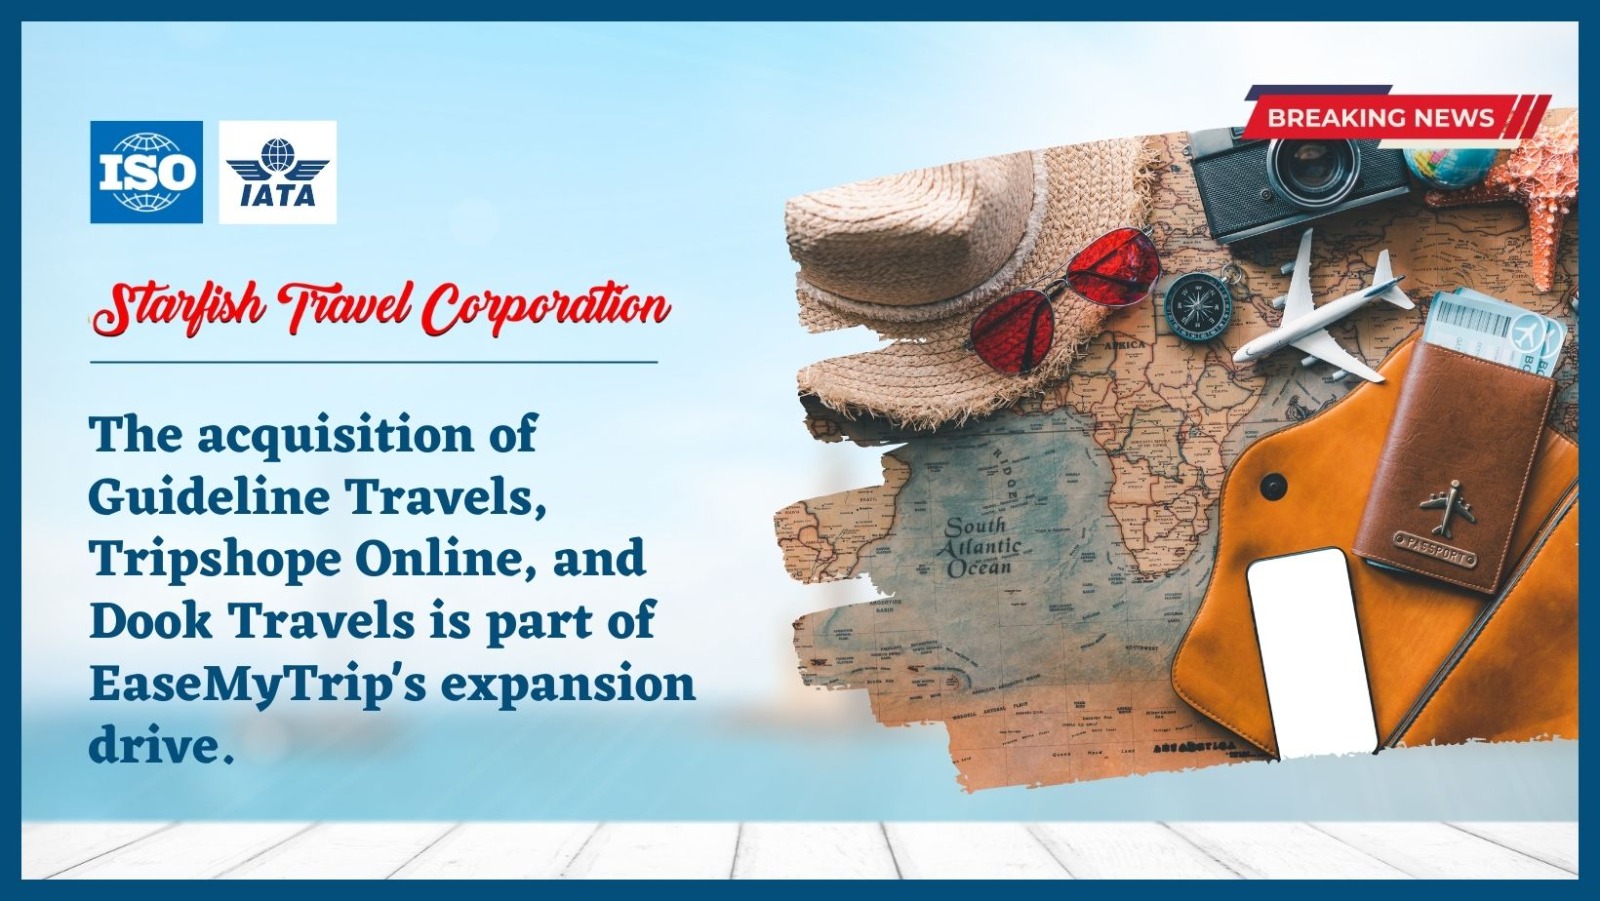 You are currently viewing The acquisition of Guideline Travels, Tripshope Online, and Dook Travels is part of EaseMyTrip’s expansion drive.